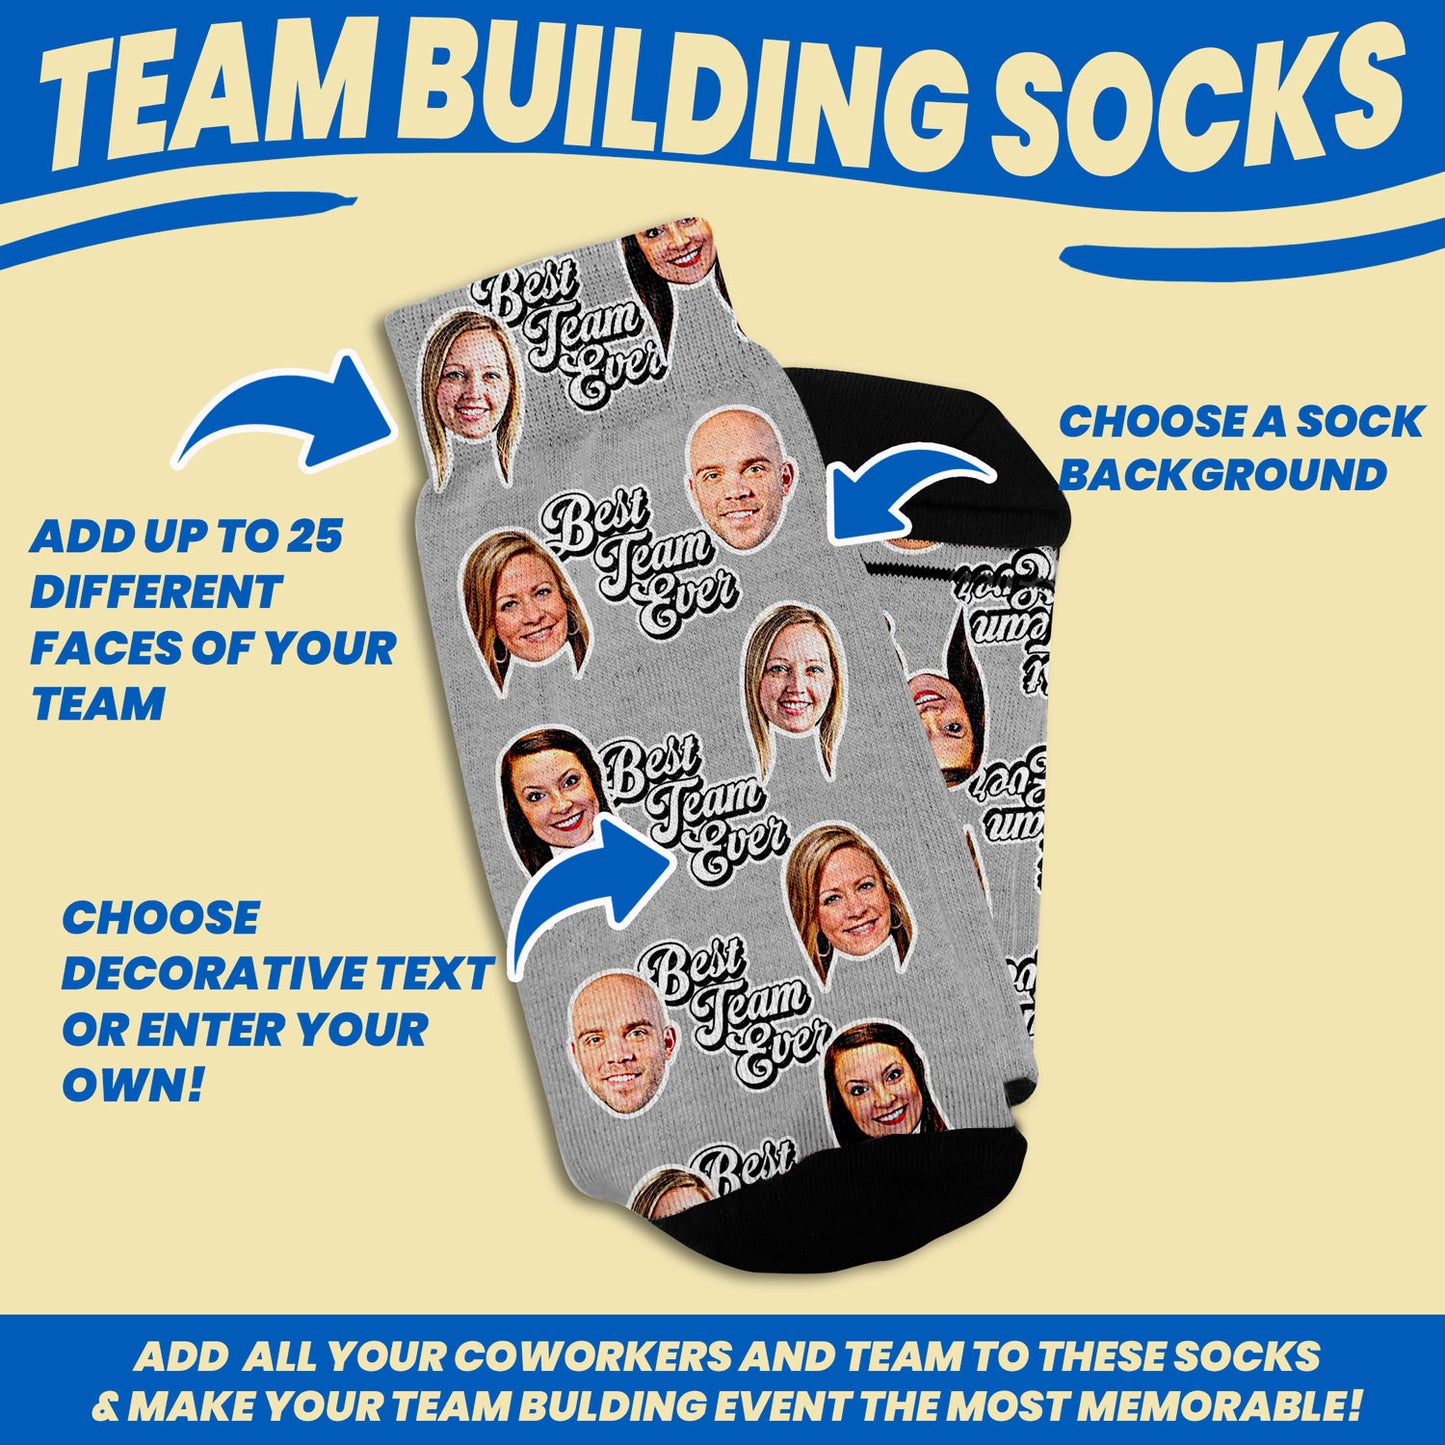 team building personalized gifts socks with faces personalization options such 25 faces to decorate on socks, sock colors options and text decoration options.